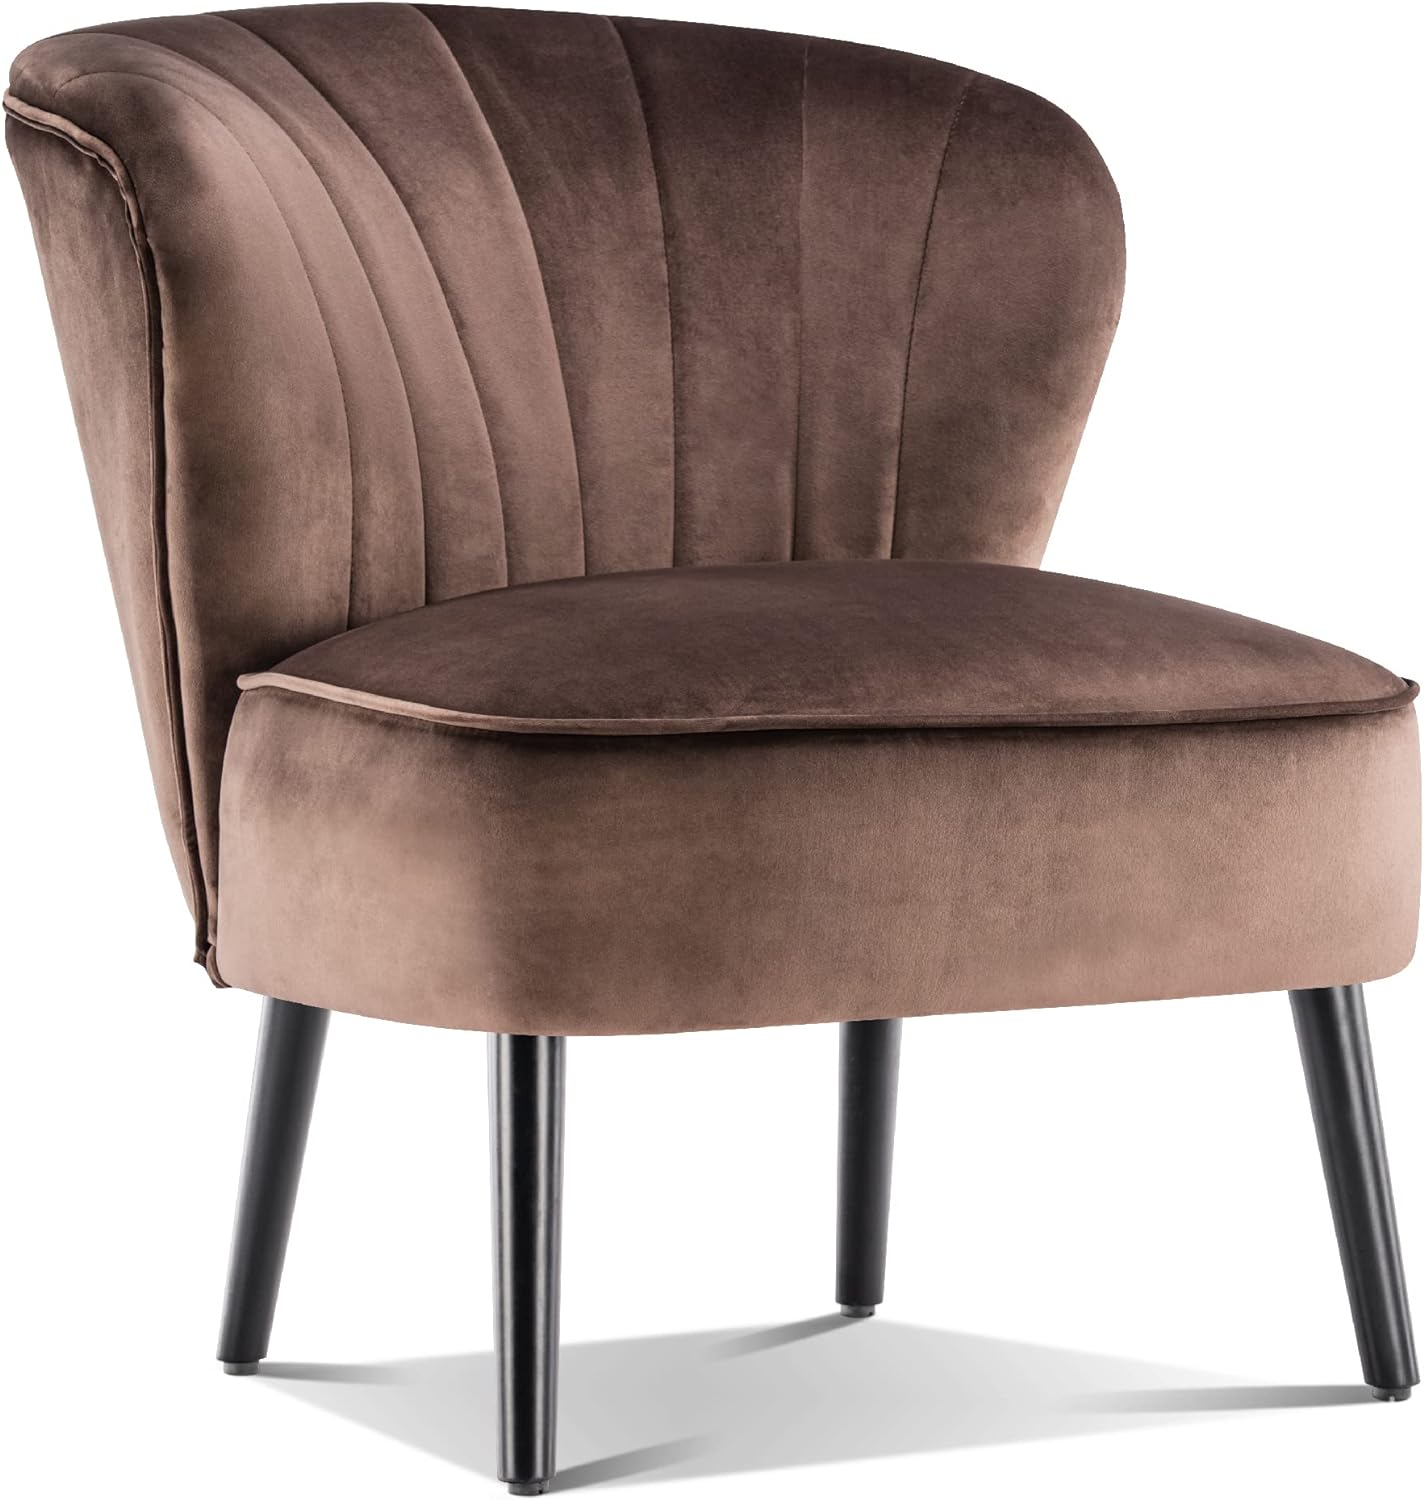 Mcombo Modern Accent Chair, Velvet Tufted Wingback Chairs, Upholstered Side Chair, Comfy Shell Chair for Living Room Bedroom Rec